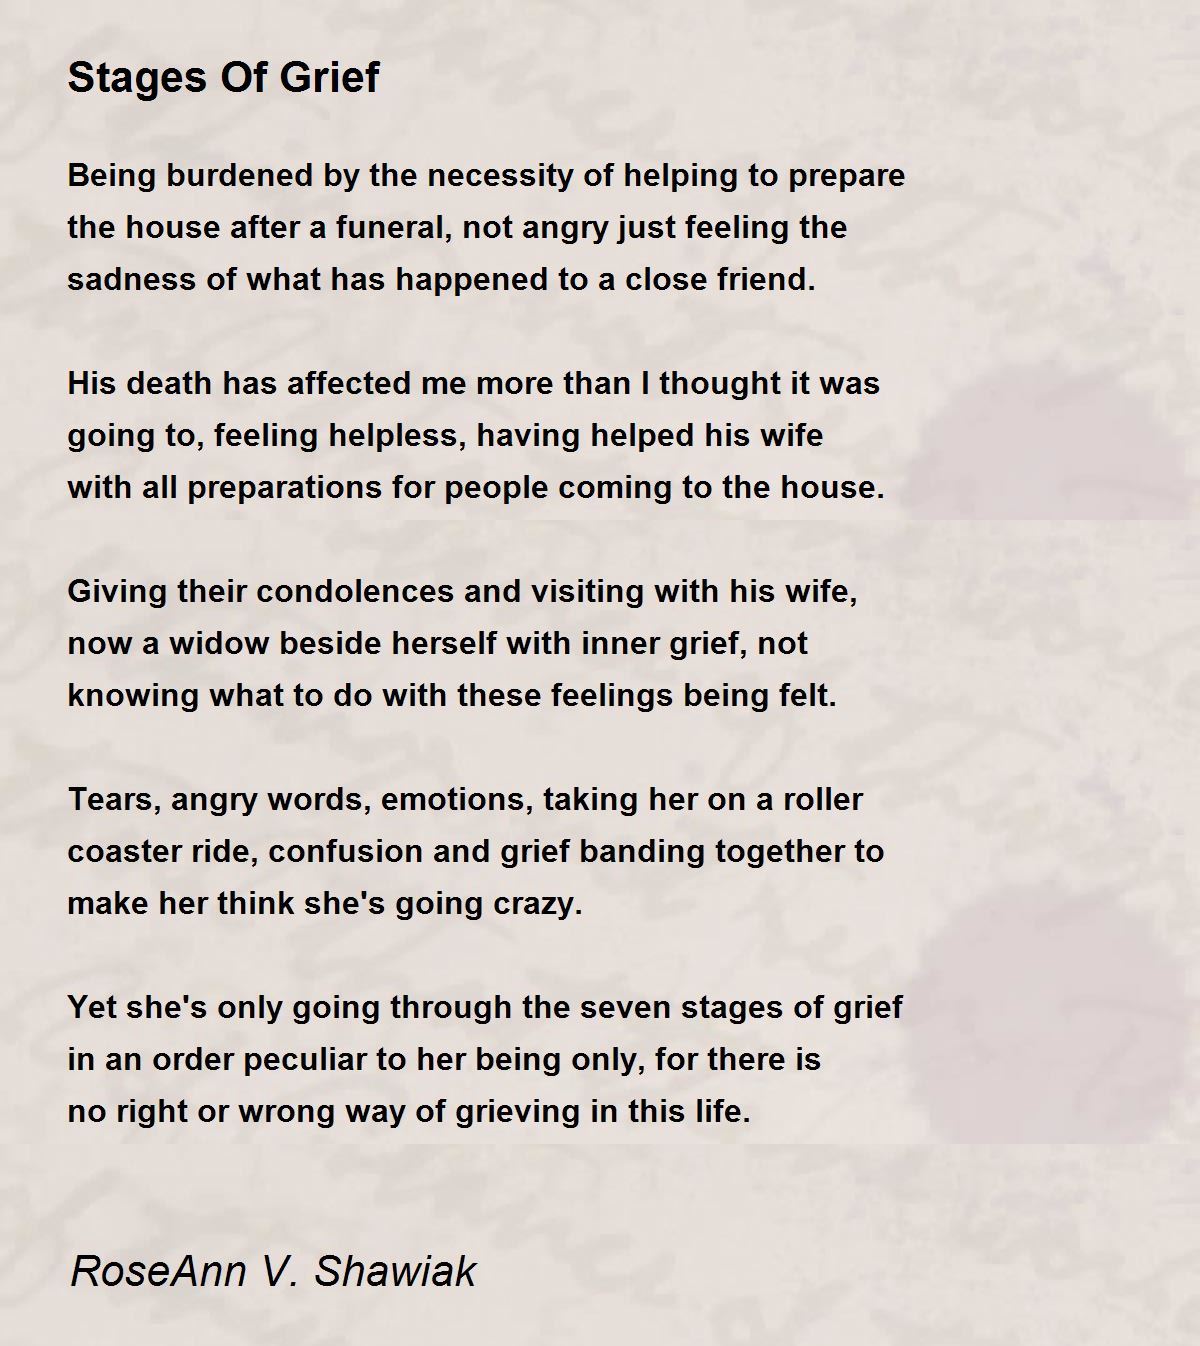 5 stages of grief poem